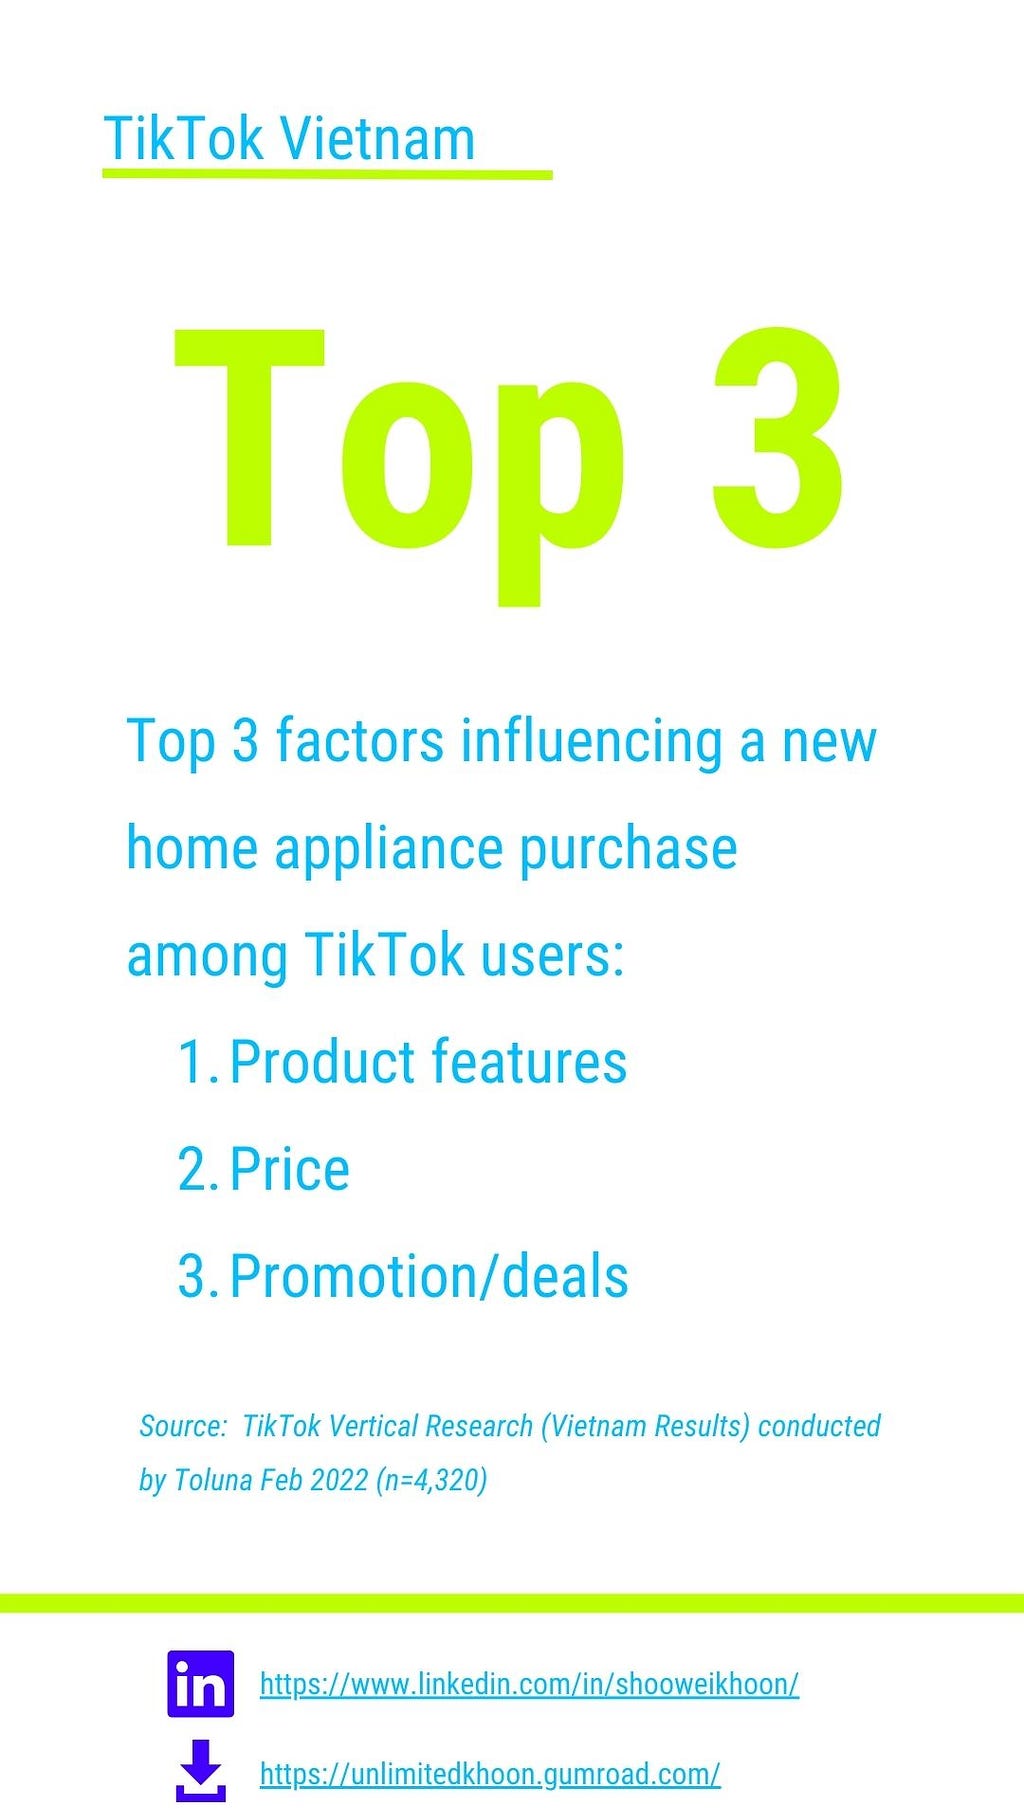 Top 3 factors influencing a new home appliance purchase among VN TikTok users